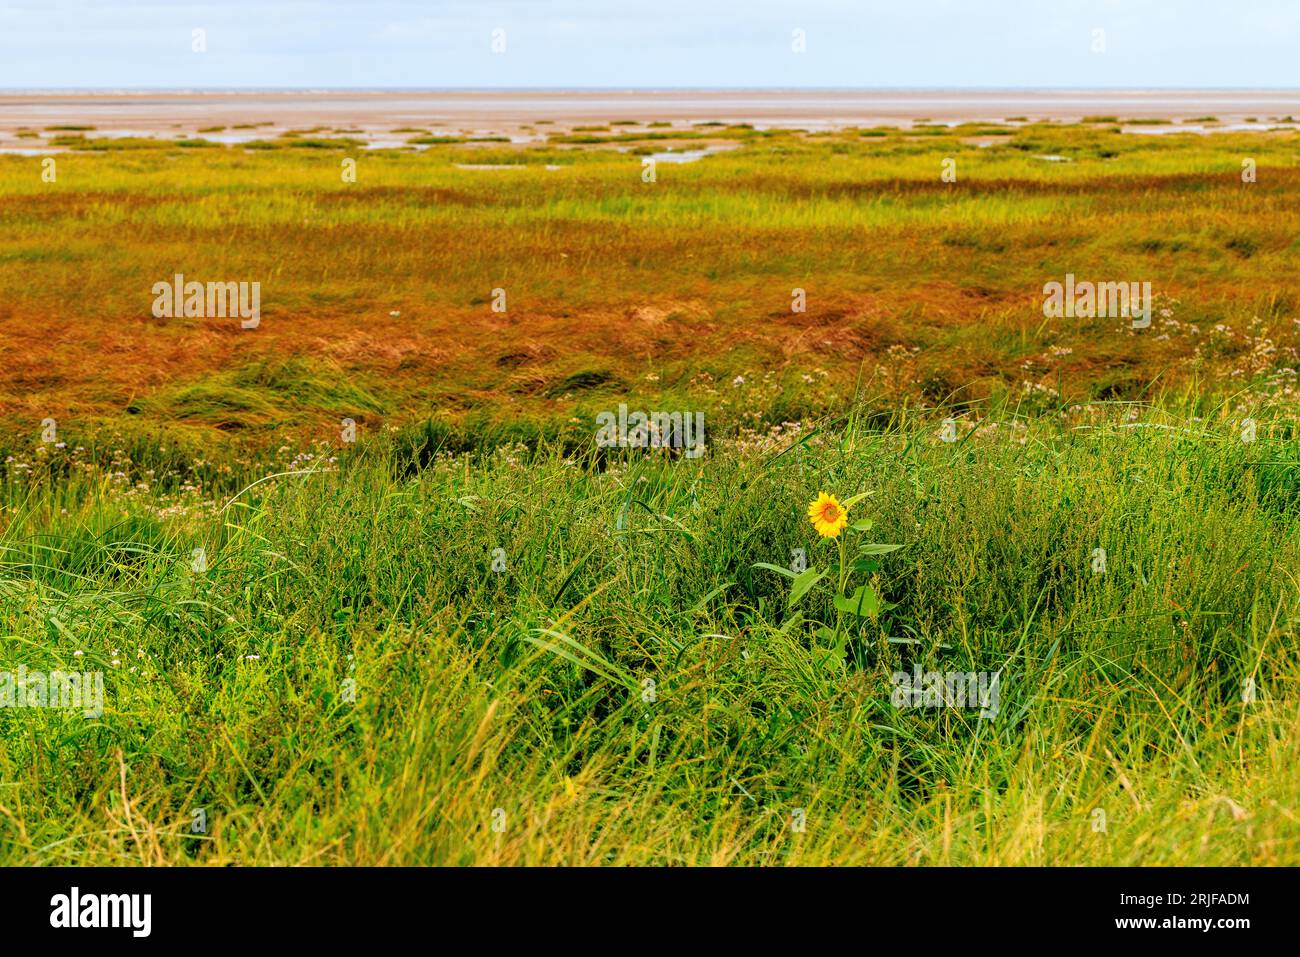 a solitary sunflower blooms in the low grassy sand dunes on st annes beach at low tide with marshy grass and sandy beach behind Stock Photo